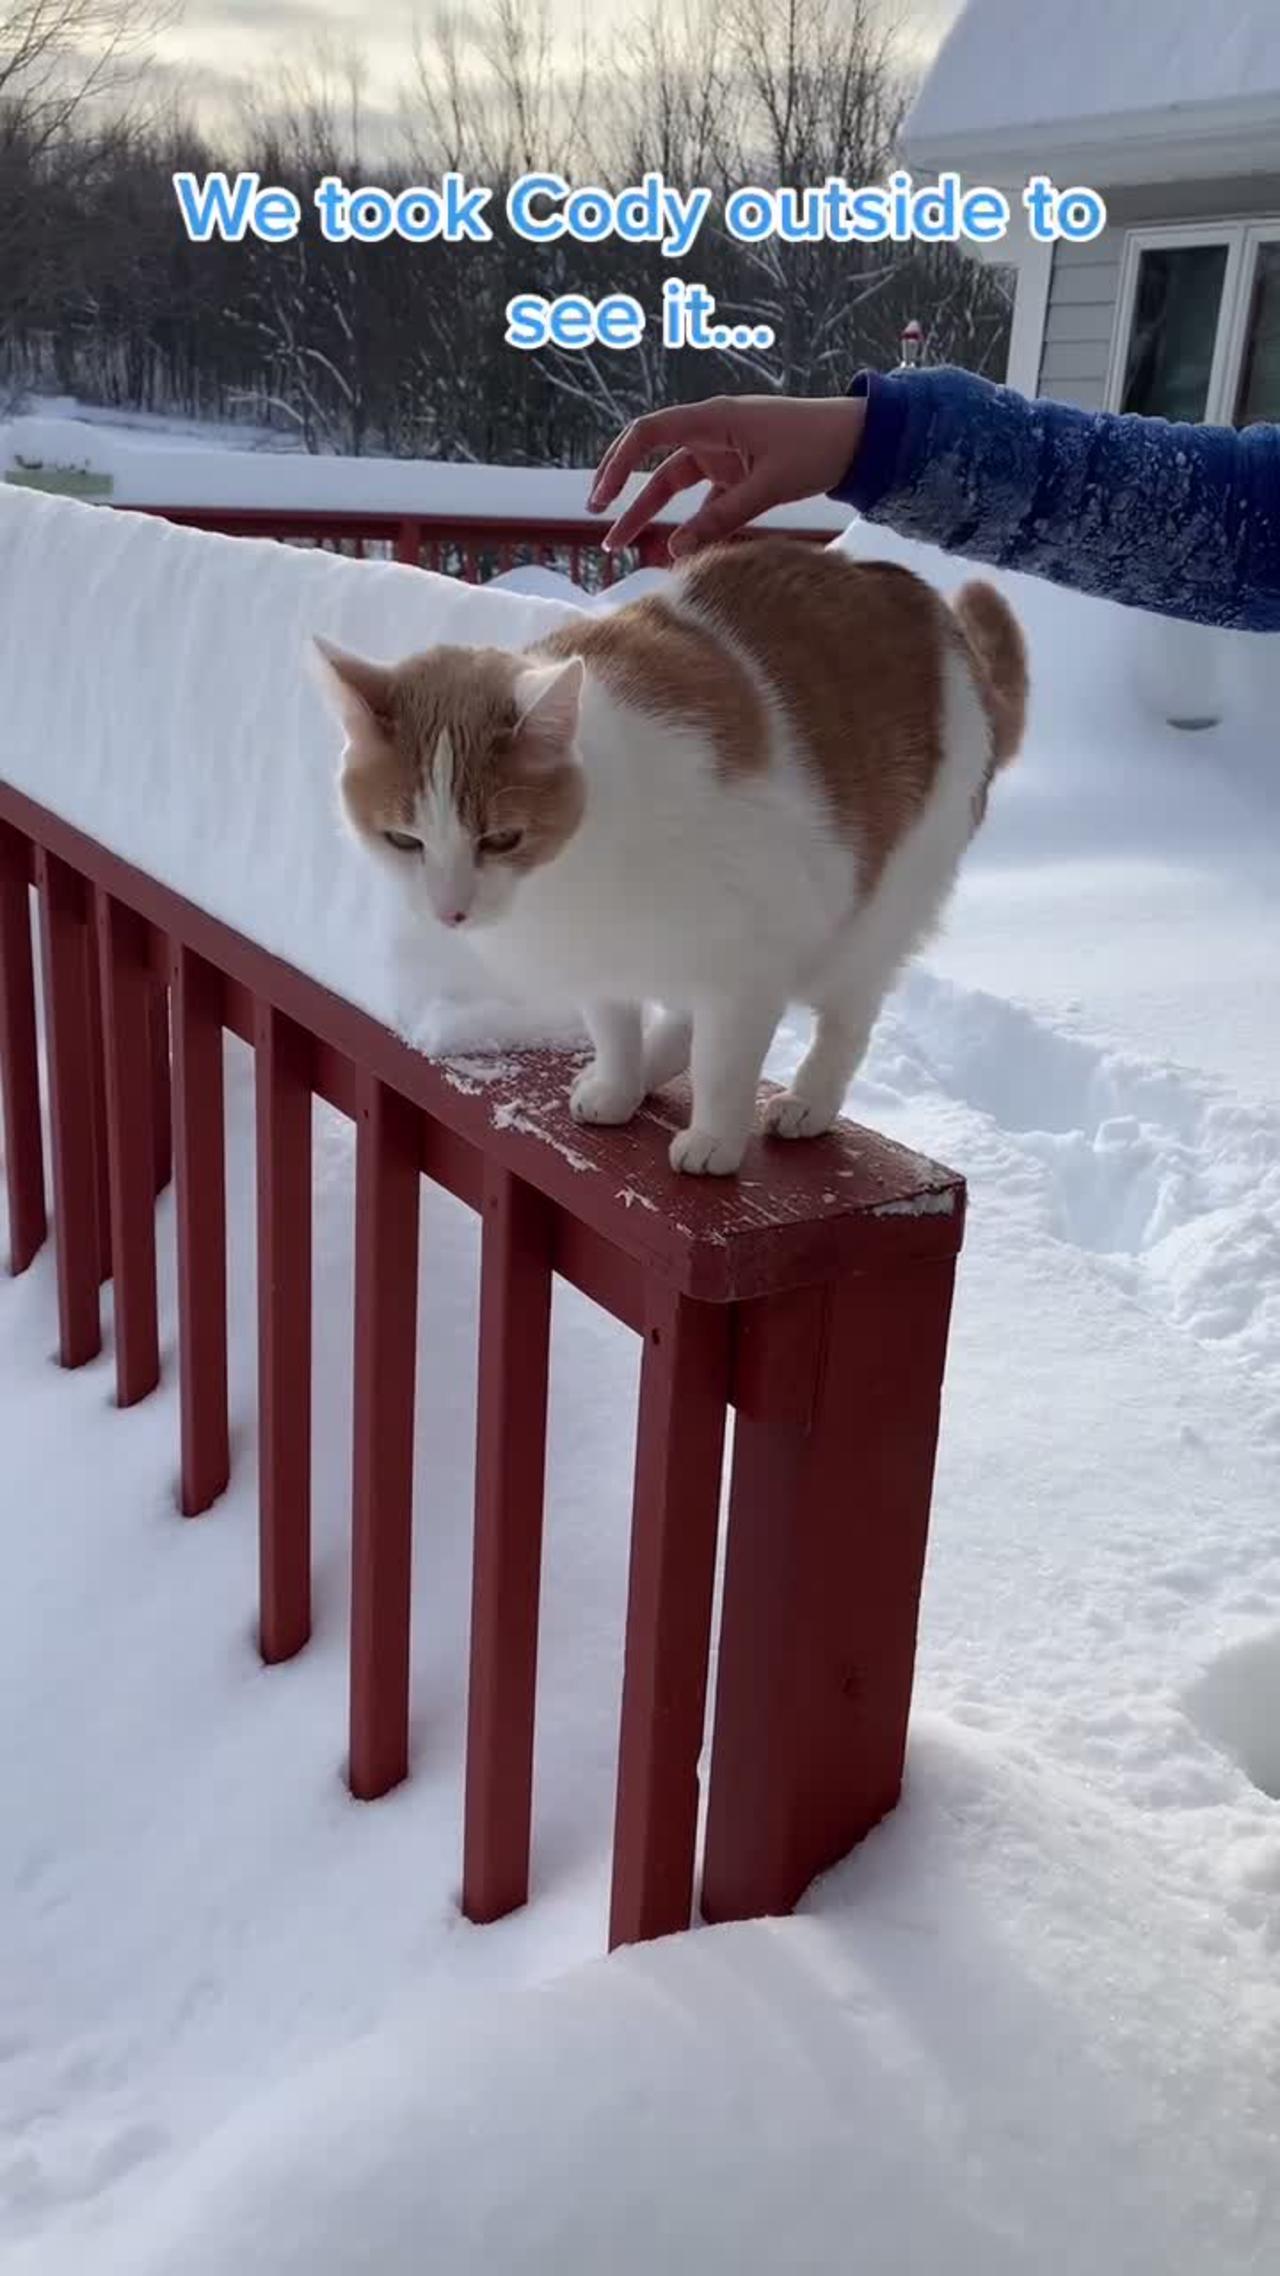 Kitten jumps into the snow and this happened..